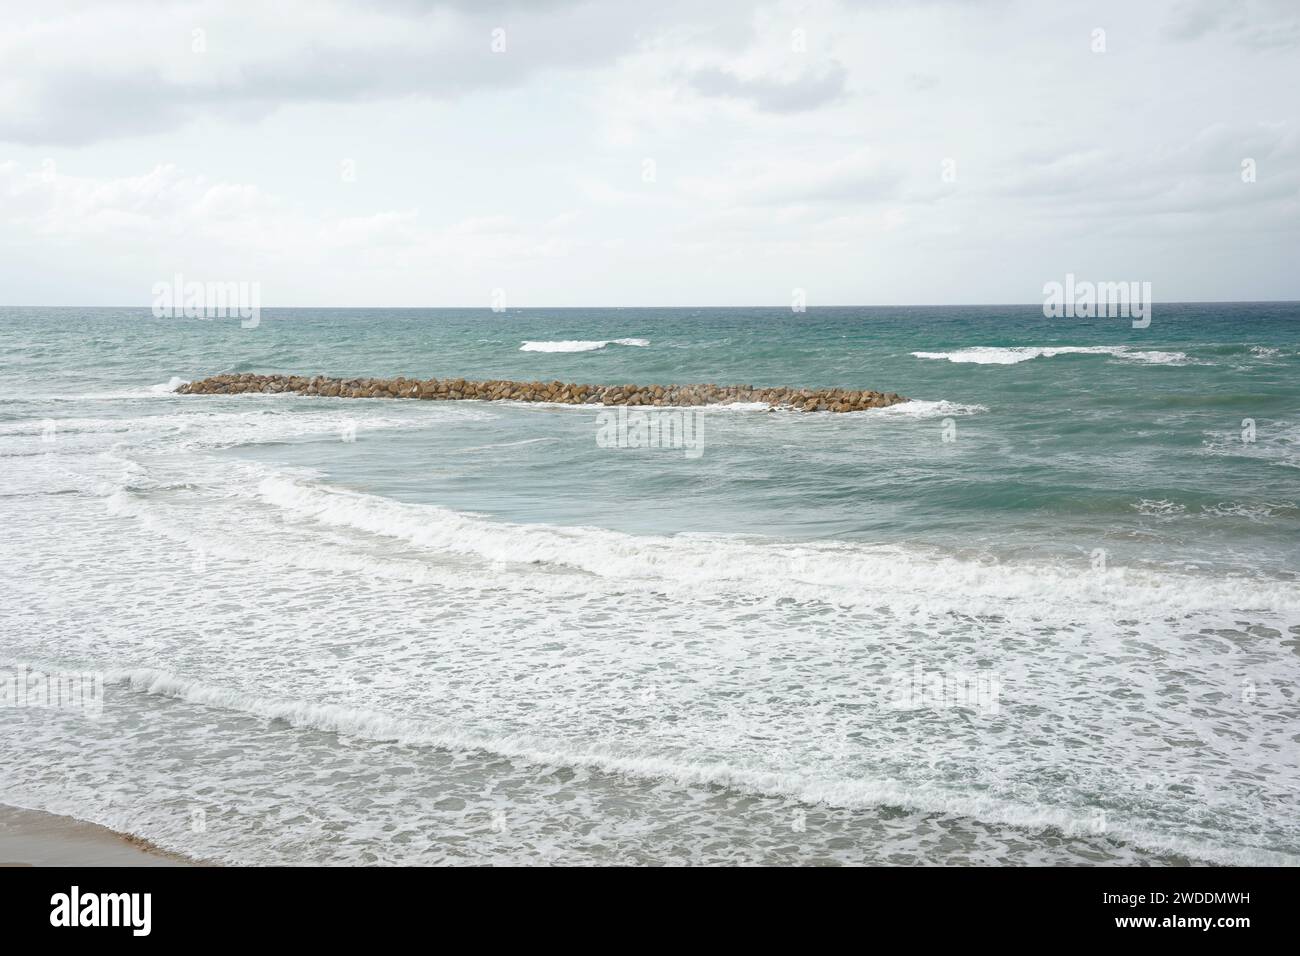 Strong currents and waves in the sea. Waves successfully crash into the stone breakwater. Stock Photo